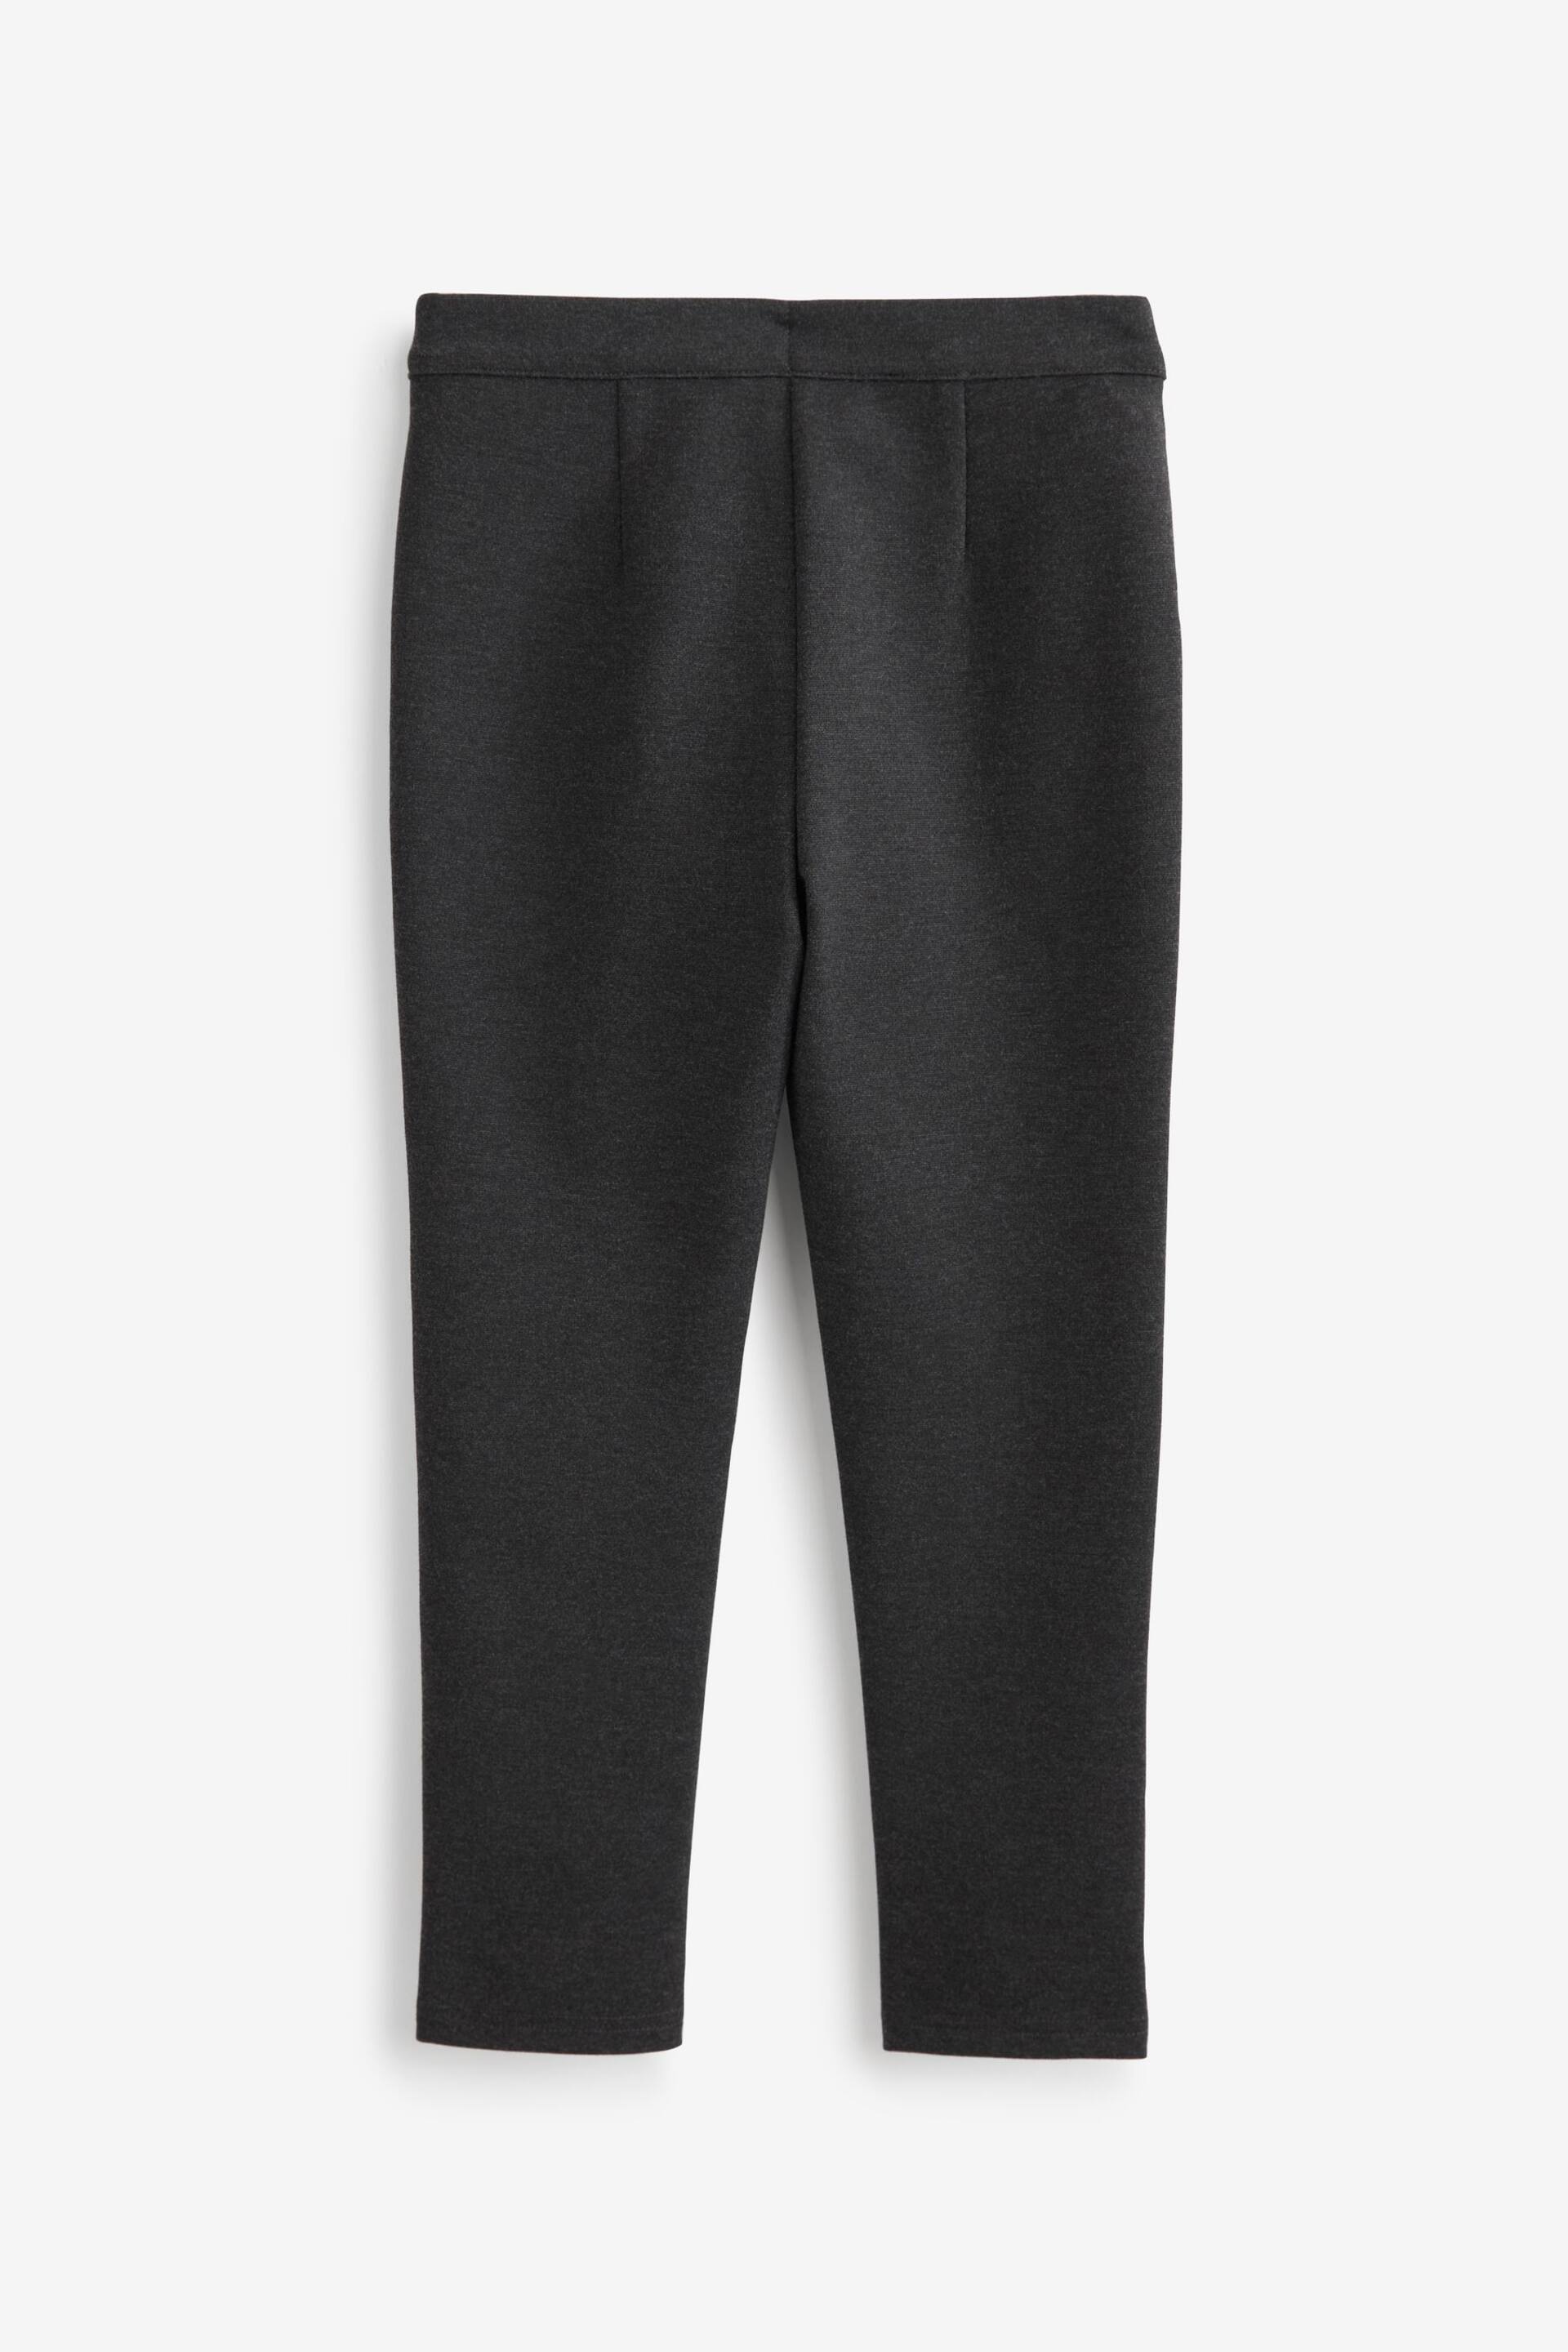 Grey Jersey Stretch Pull-On Skinny School Trousers (3-16yrs) - Image 5 of 6